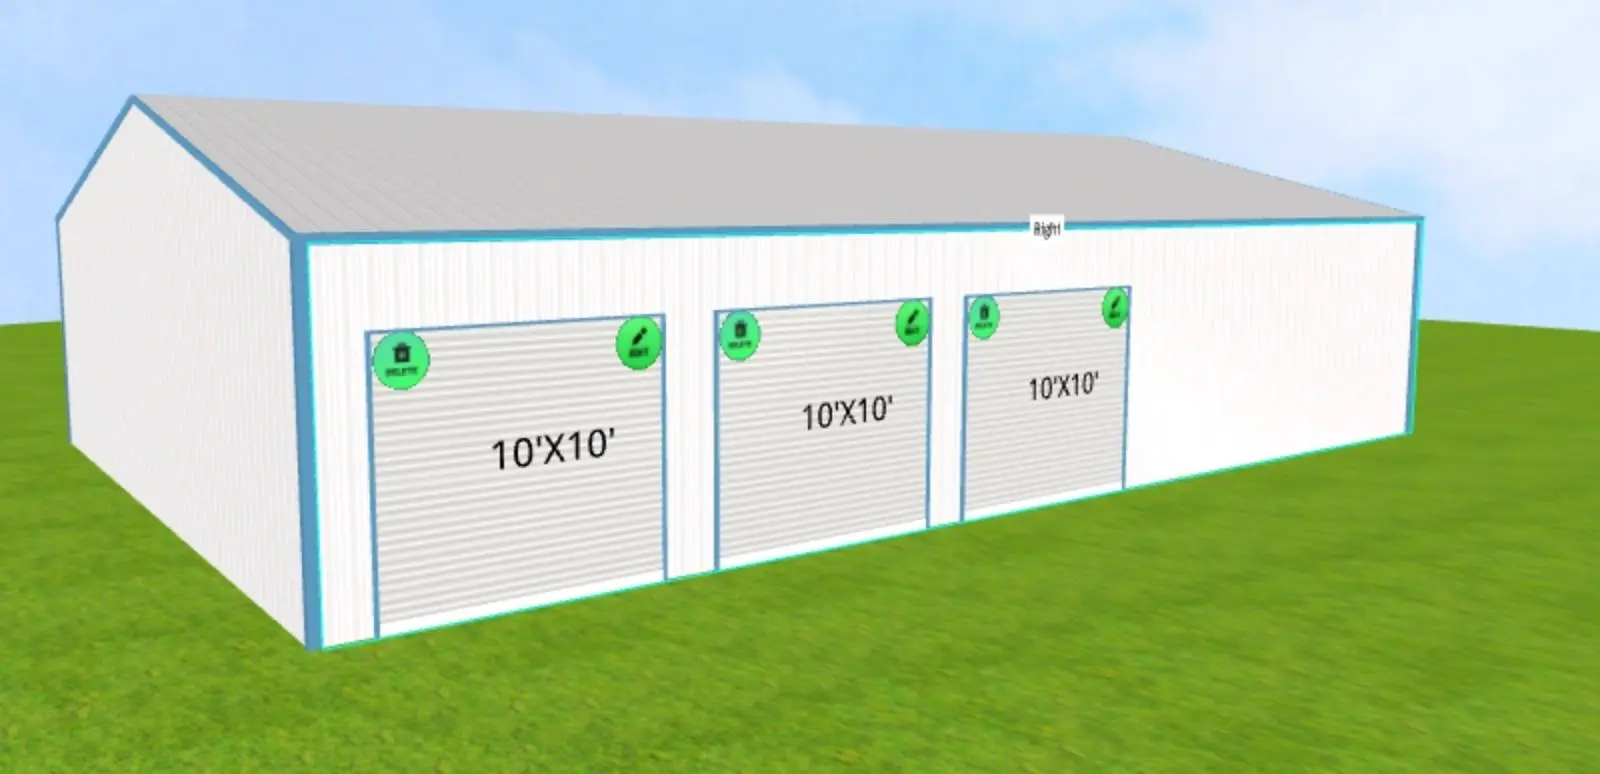 A rendering of the three garage doors on this building.